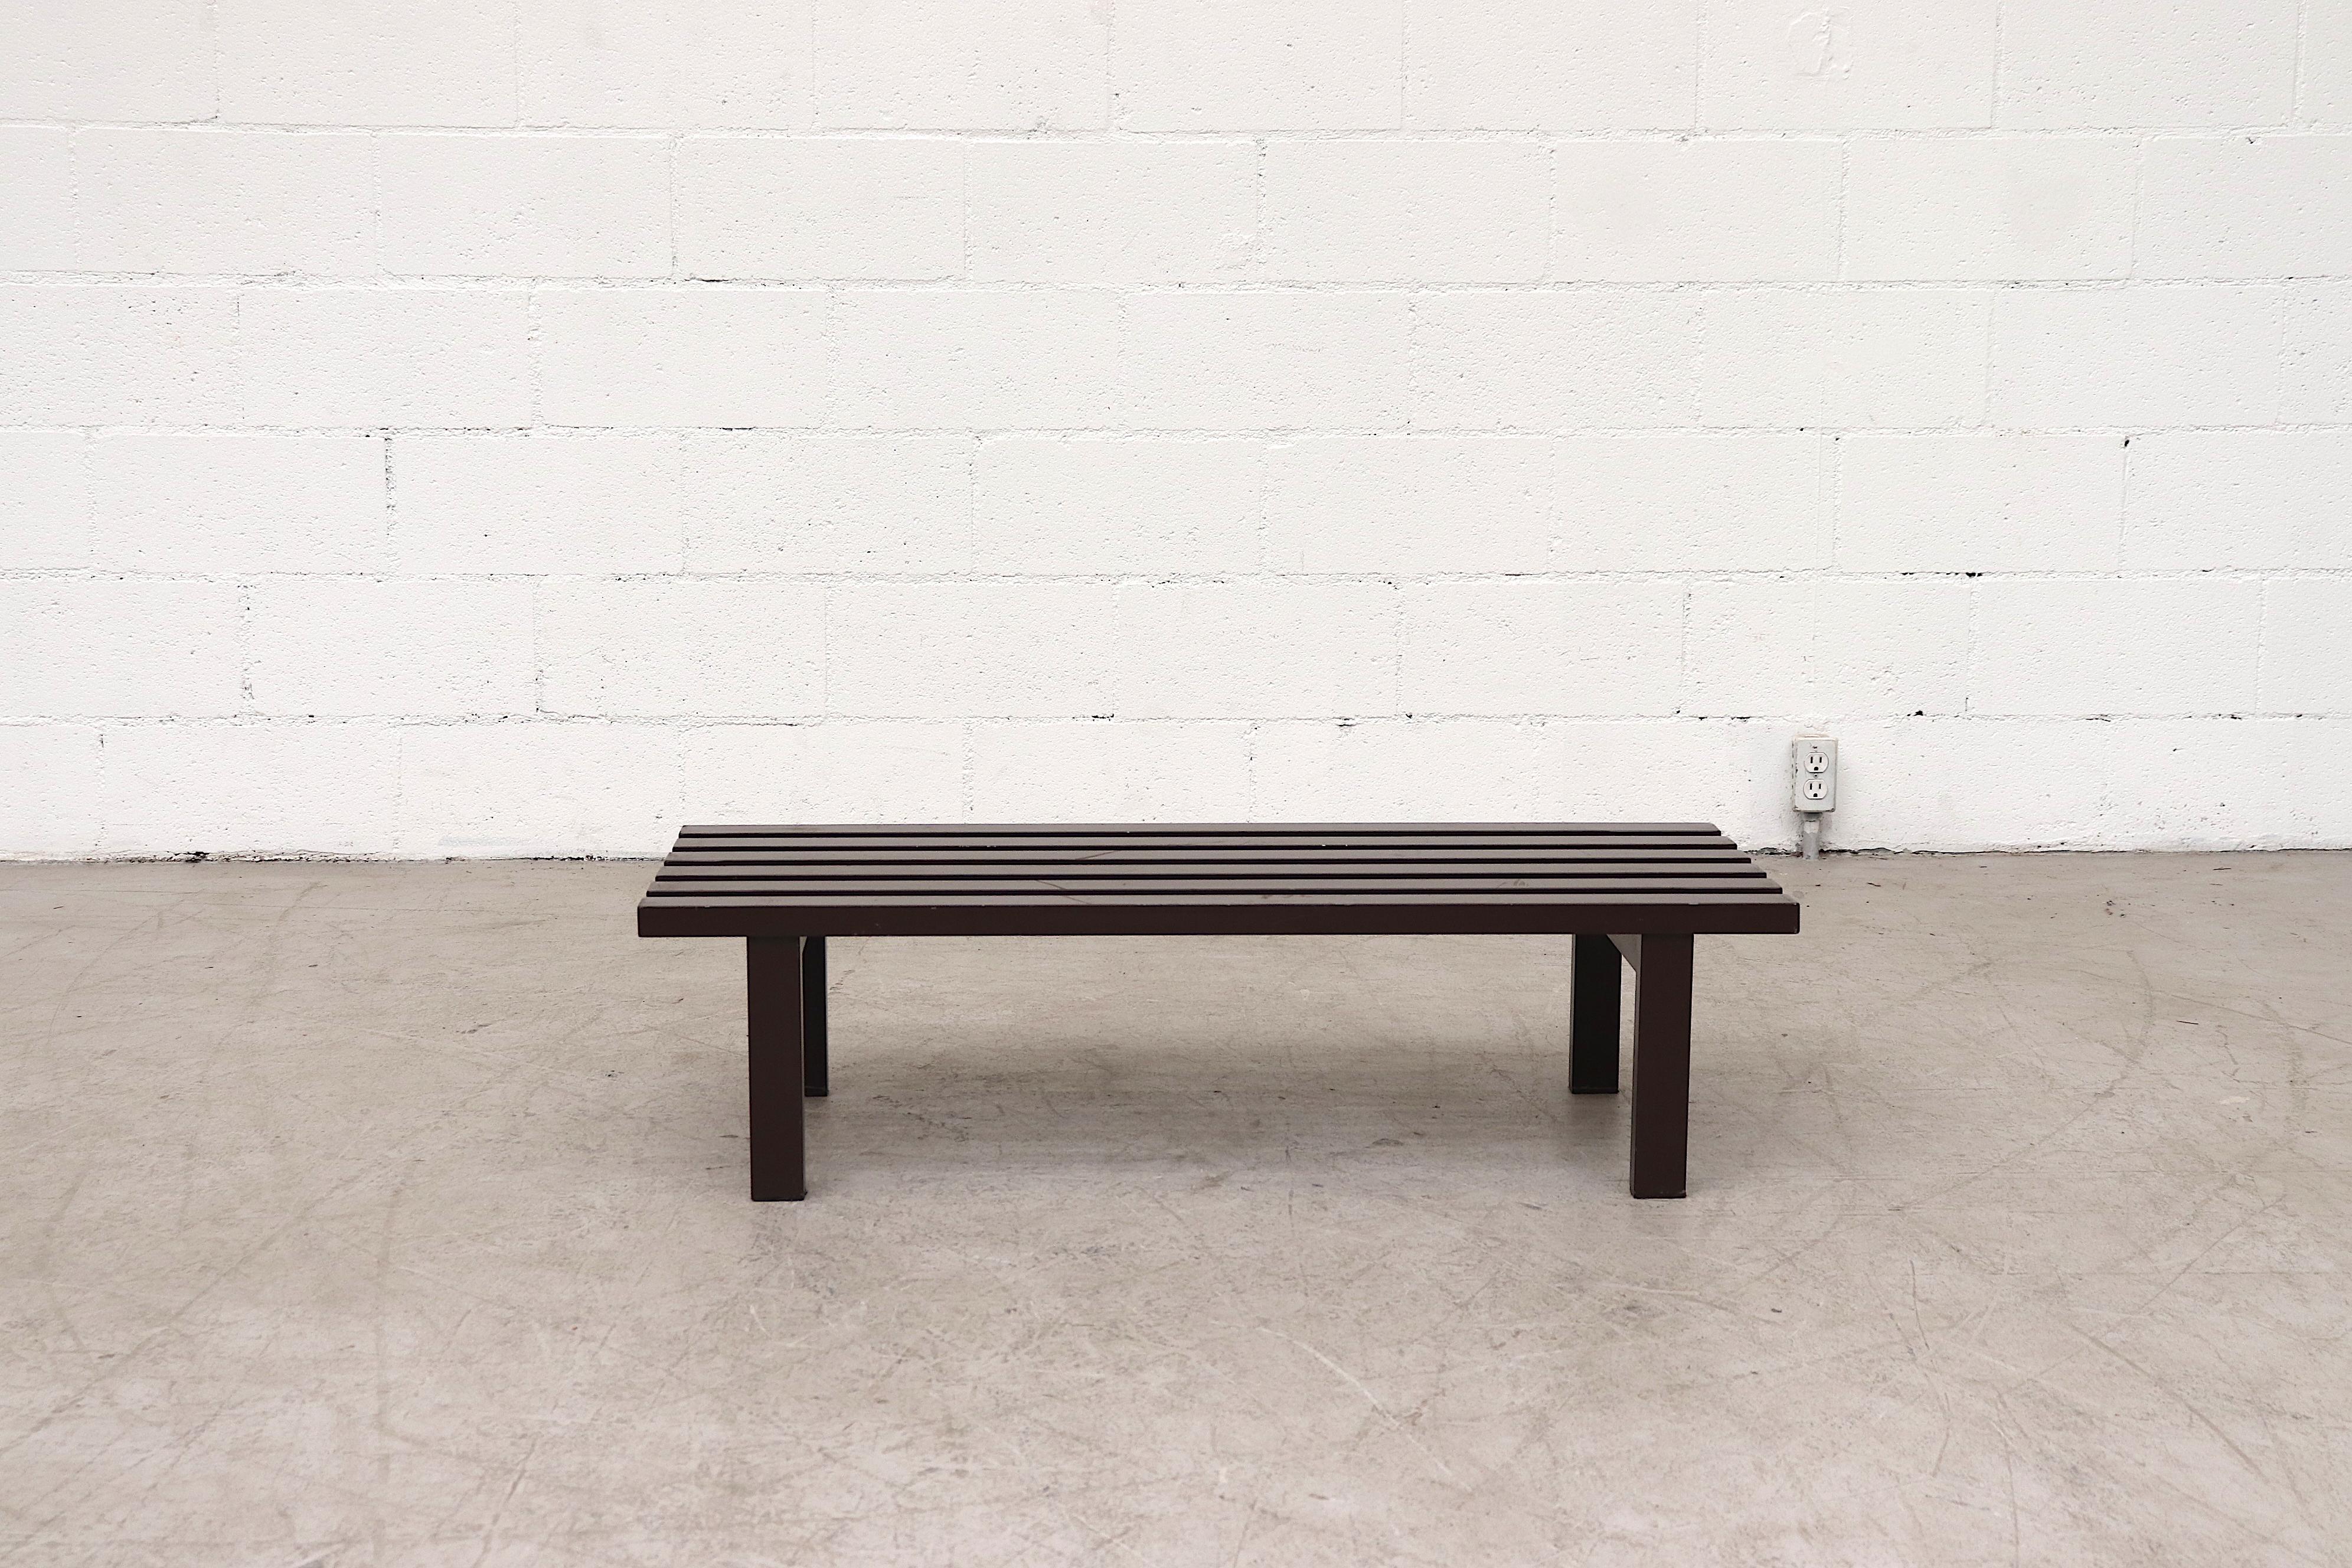 Martin Visser Style Industrial Slat Benches in Brown Enameled Metal. In Very Original Condition with Visible Enamel Wear and Scratching. Priced Individually. Similar Larger Benches in Black enameled metal (LU922418079151) Also Available.